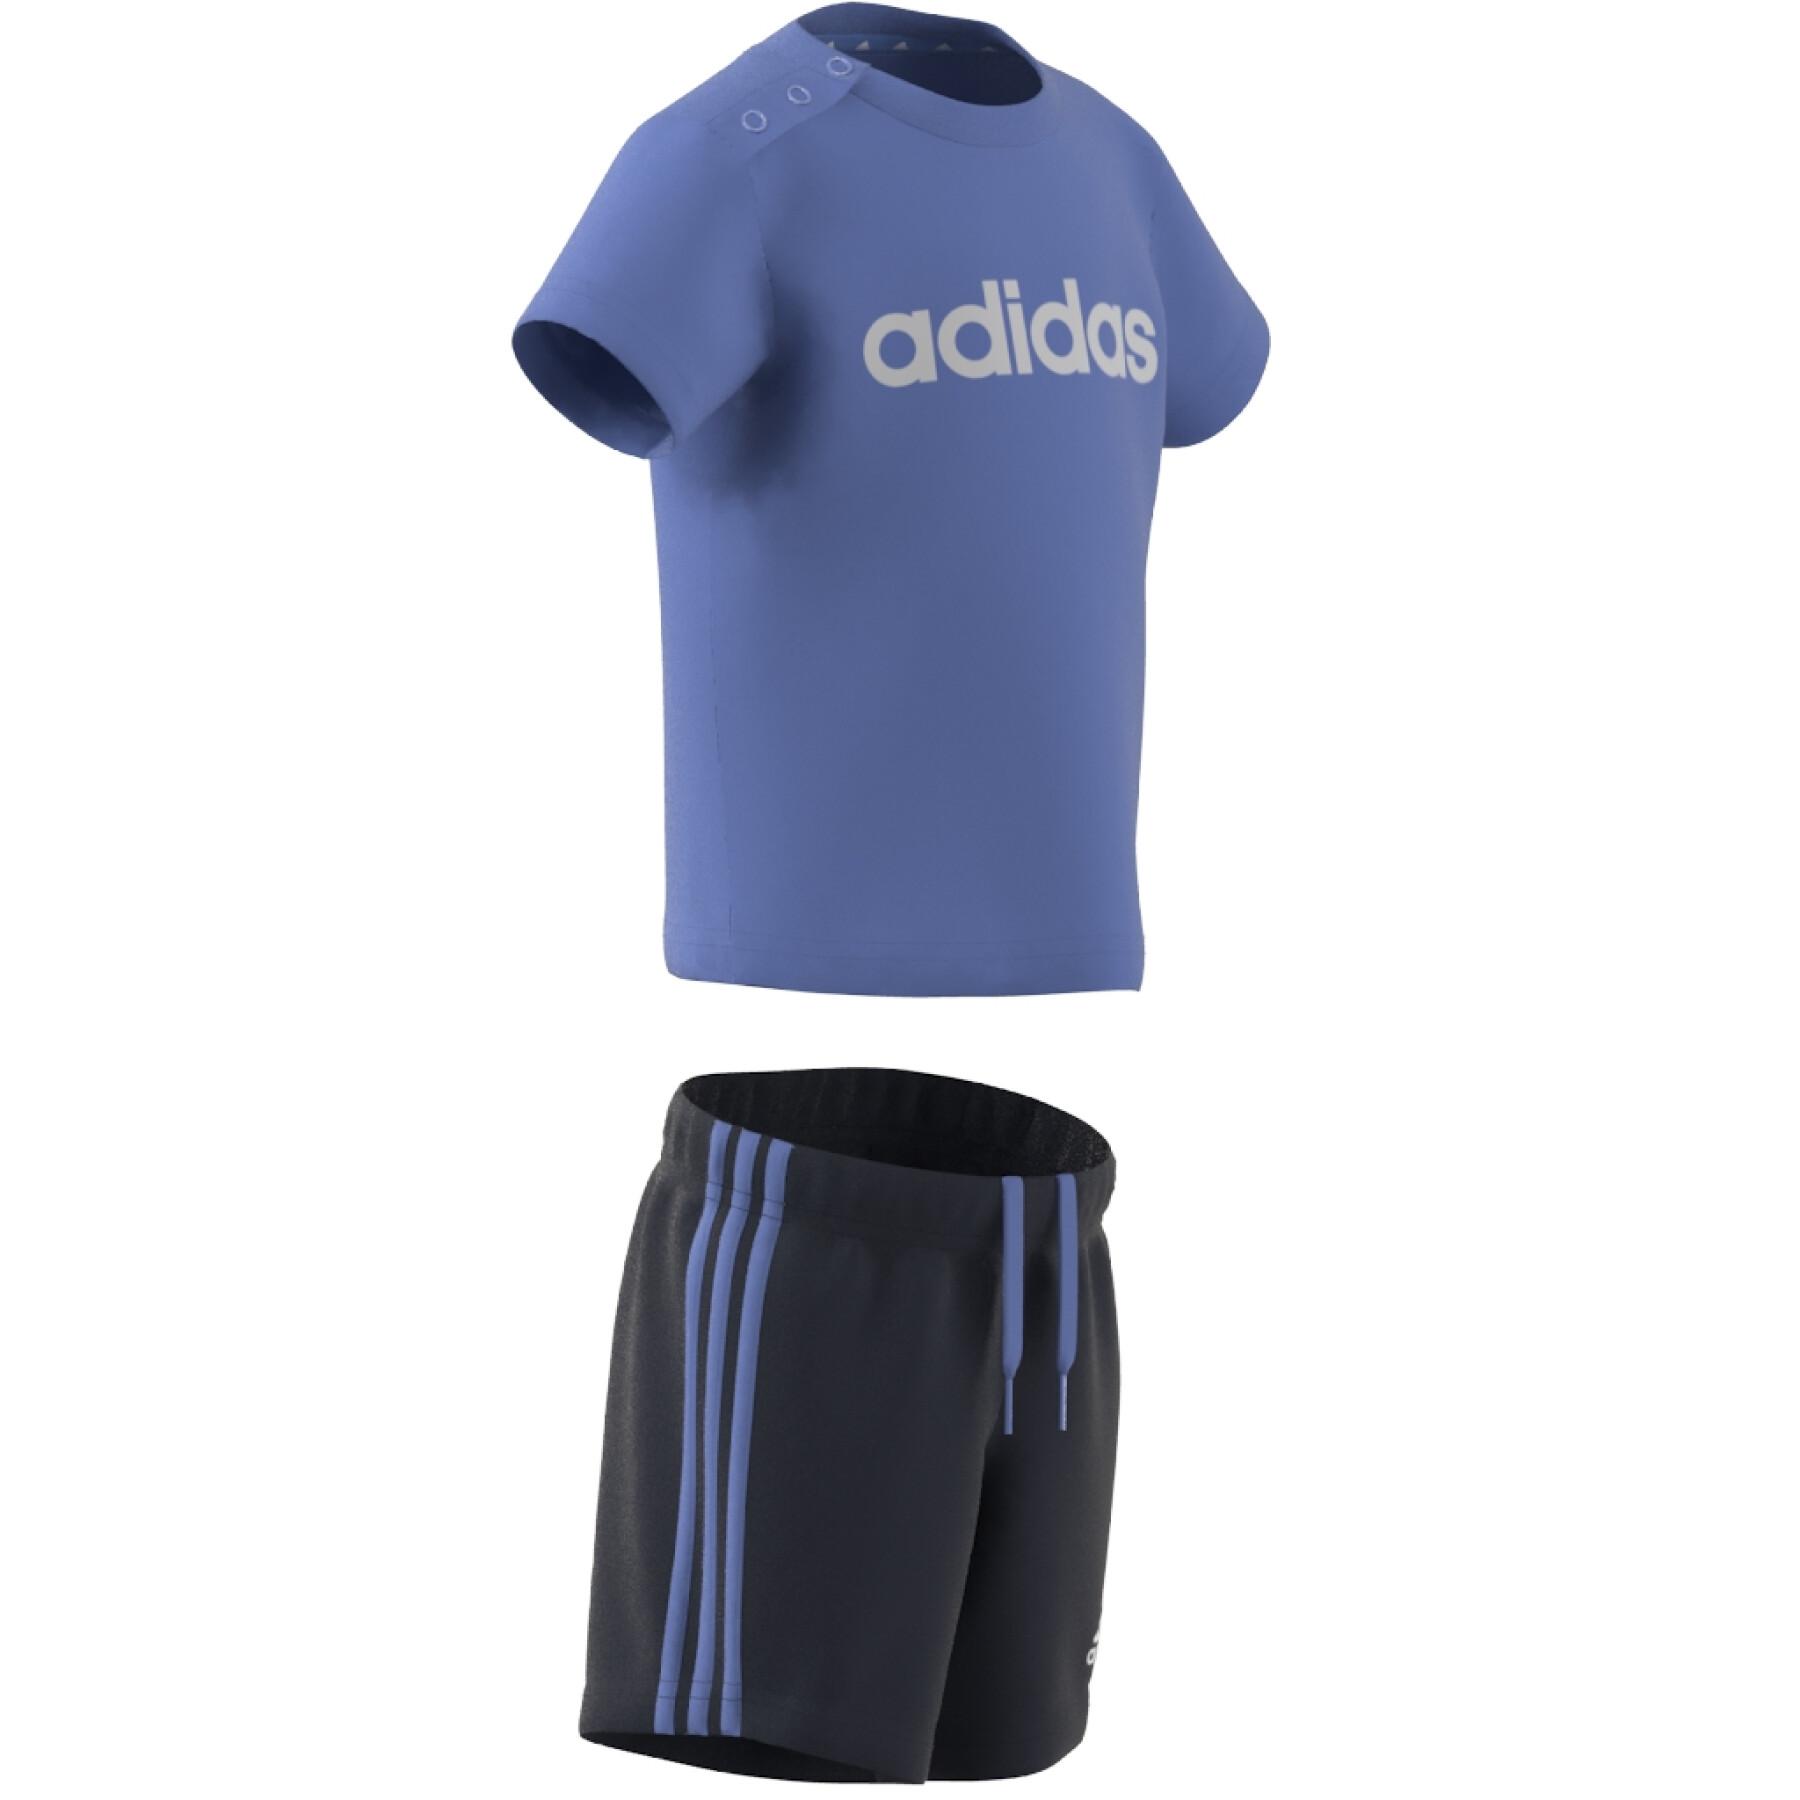 Organic cotton t-shirt and shorts set adidas 3-Stripes Essentials Lineage